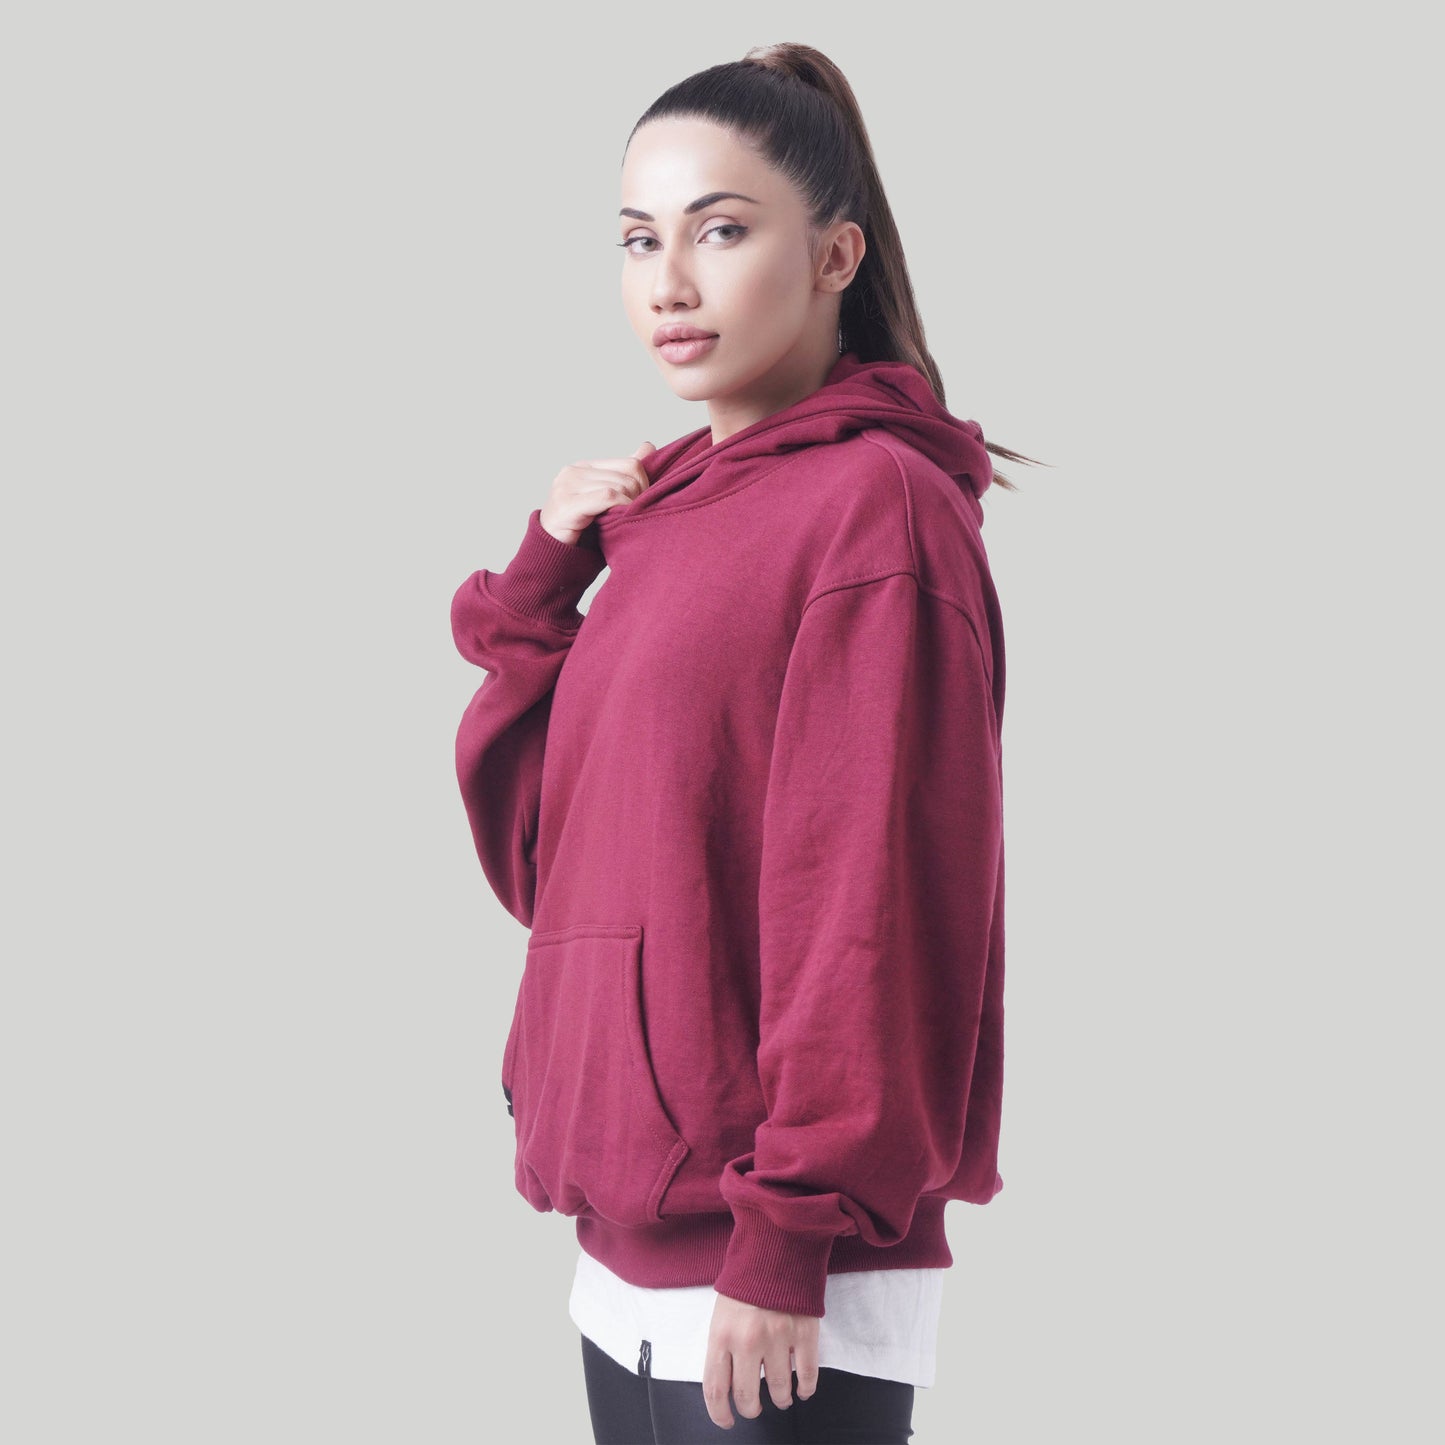 Stag Oversized Rest Day Unisex Hoodie (Maroon)